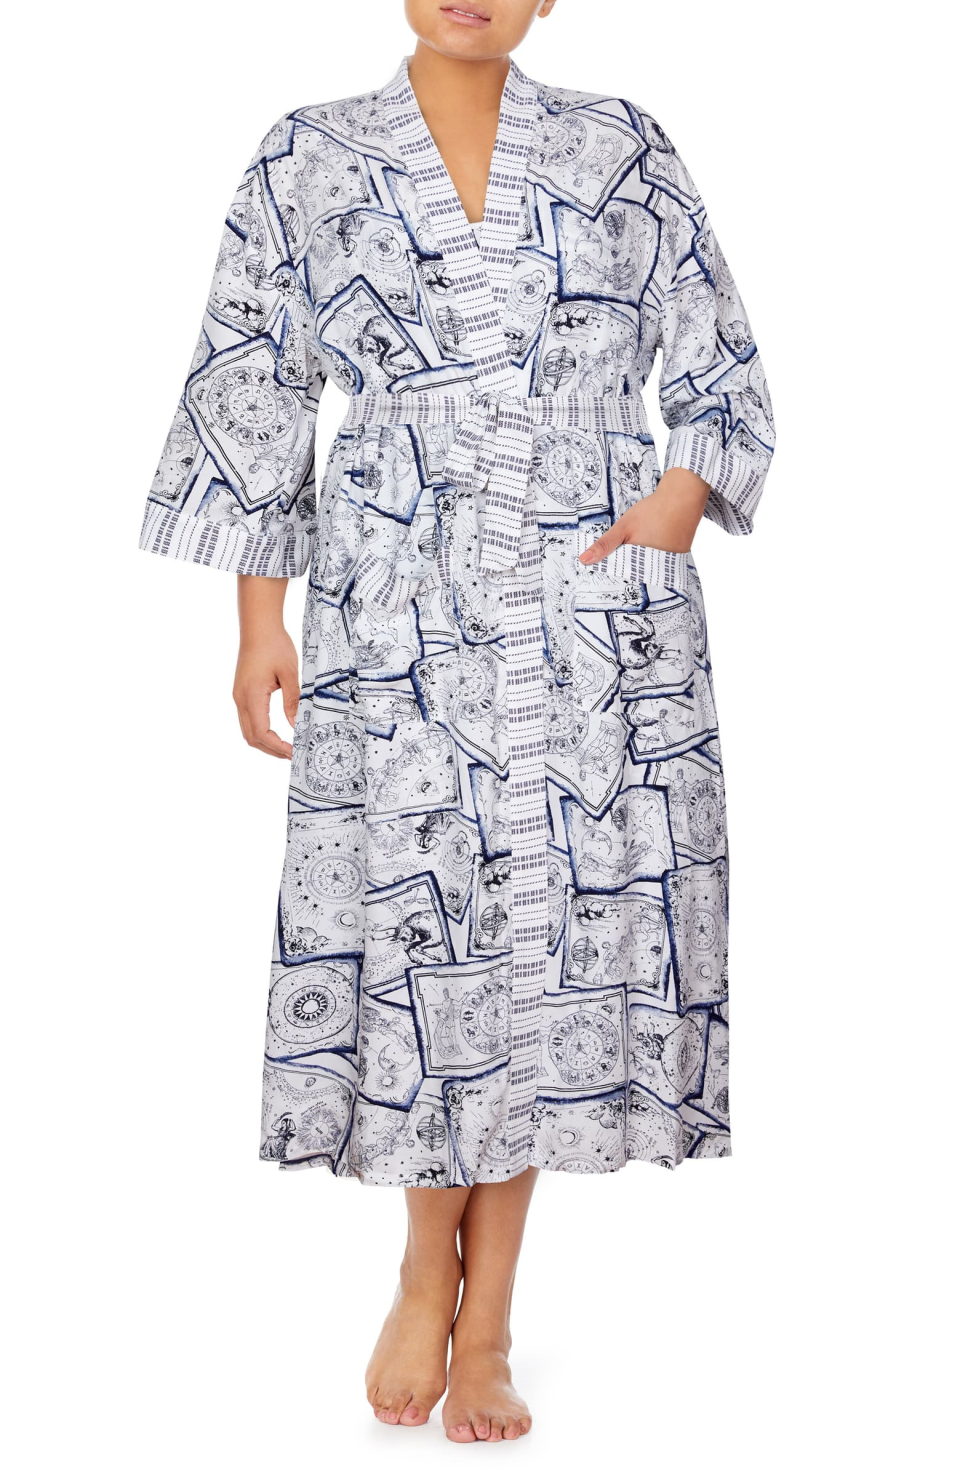 <h2>Refinery29 Print Maxi Robe</h2><br>To be very transparent, we do know how to make a pretty great robe. We designed this one in a fun horoscope inspired print and a lightweight fabric, making this the perfect option for fall transition weather. <br><br><br><br><strong>Refinery29</strong> Print Maxi Robe, $, available at <a href="https://go.skimresources.com/?id=30283X879131&url=https%3A%2F%2Fwww.nordstrom.com%2Fs%2Frefinery29-print-maxi-robe%2F5597880" rel="nofollow noopener" target="_blank" data-ylk="slk:Nordstrom" class="link ">Nordstrom</a>